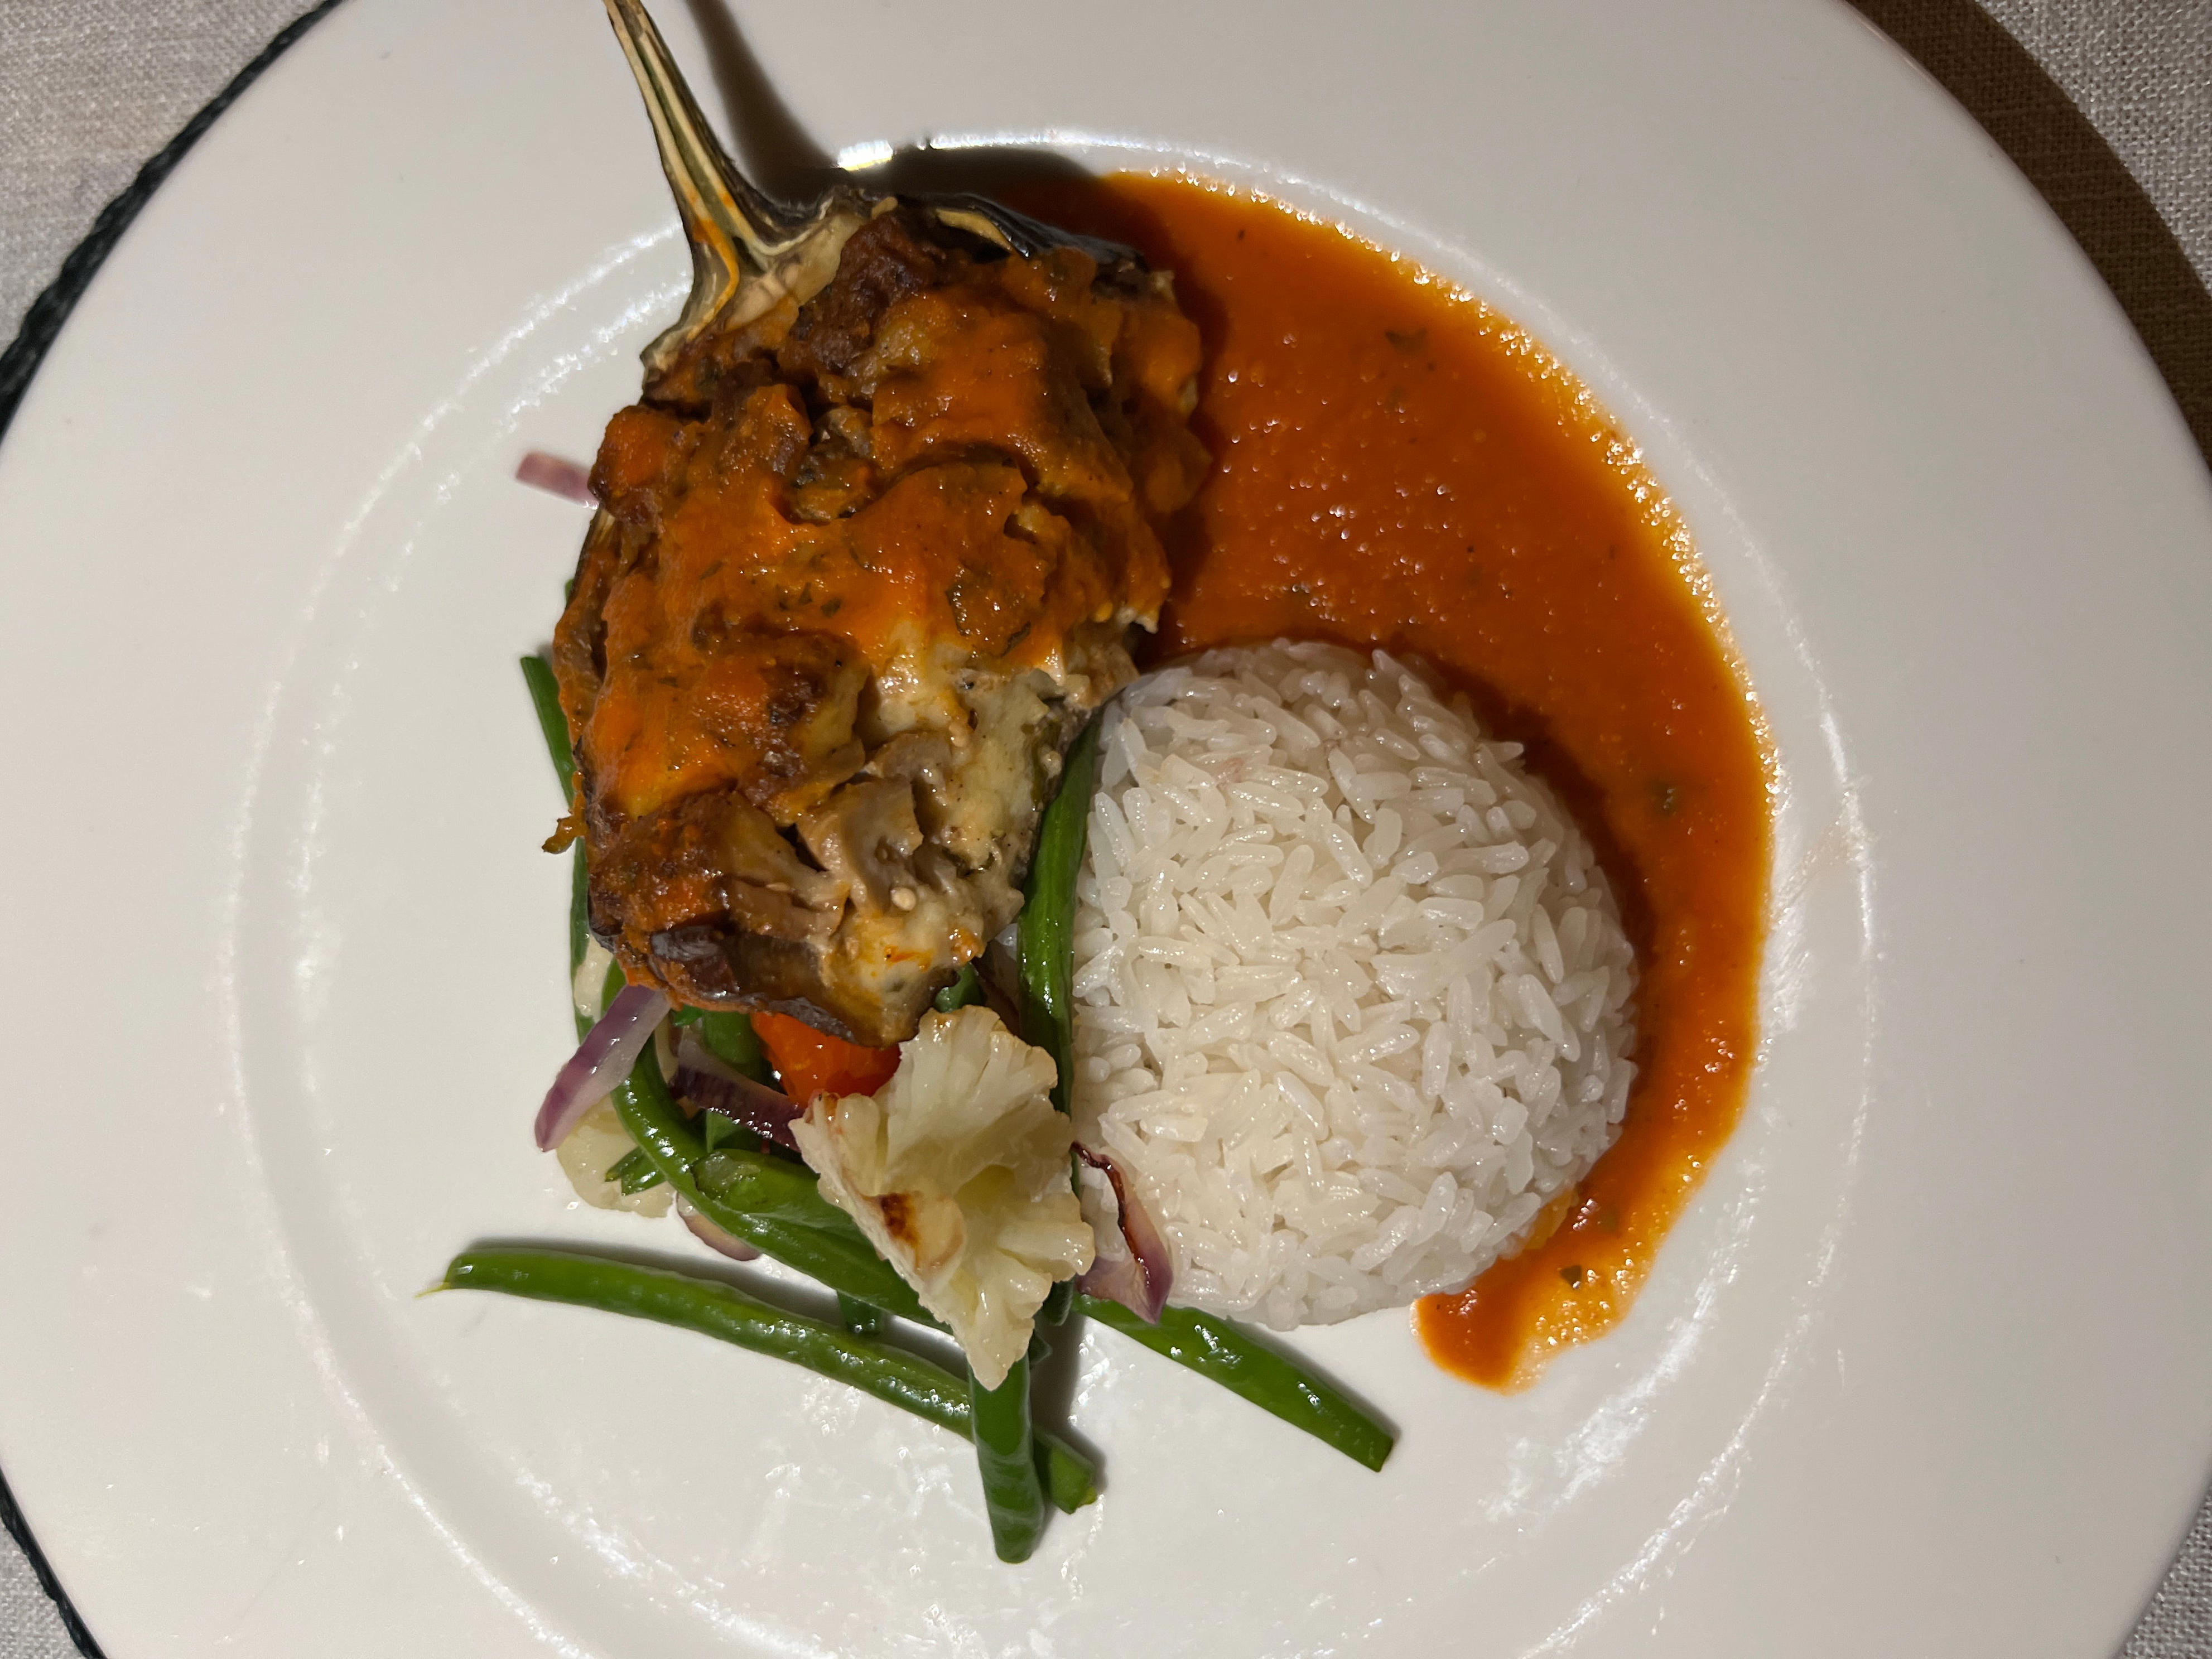 <p>The main course was usually some type of Western food, and there was always a vegetarian option.</p><p>It would've been nice to be offered more typical Tanzanian dishes, though. For me, part of the fun of traveling is learning about different countries' cuisines.</p><p>I also had access to an open bar in the main lodge. Staff could make simple cocktails, and there was lots of beer and wine. The drinks were all included with the price of the stay (except for fancy Champagnes and select wines).</p>